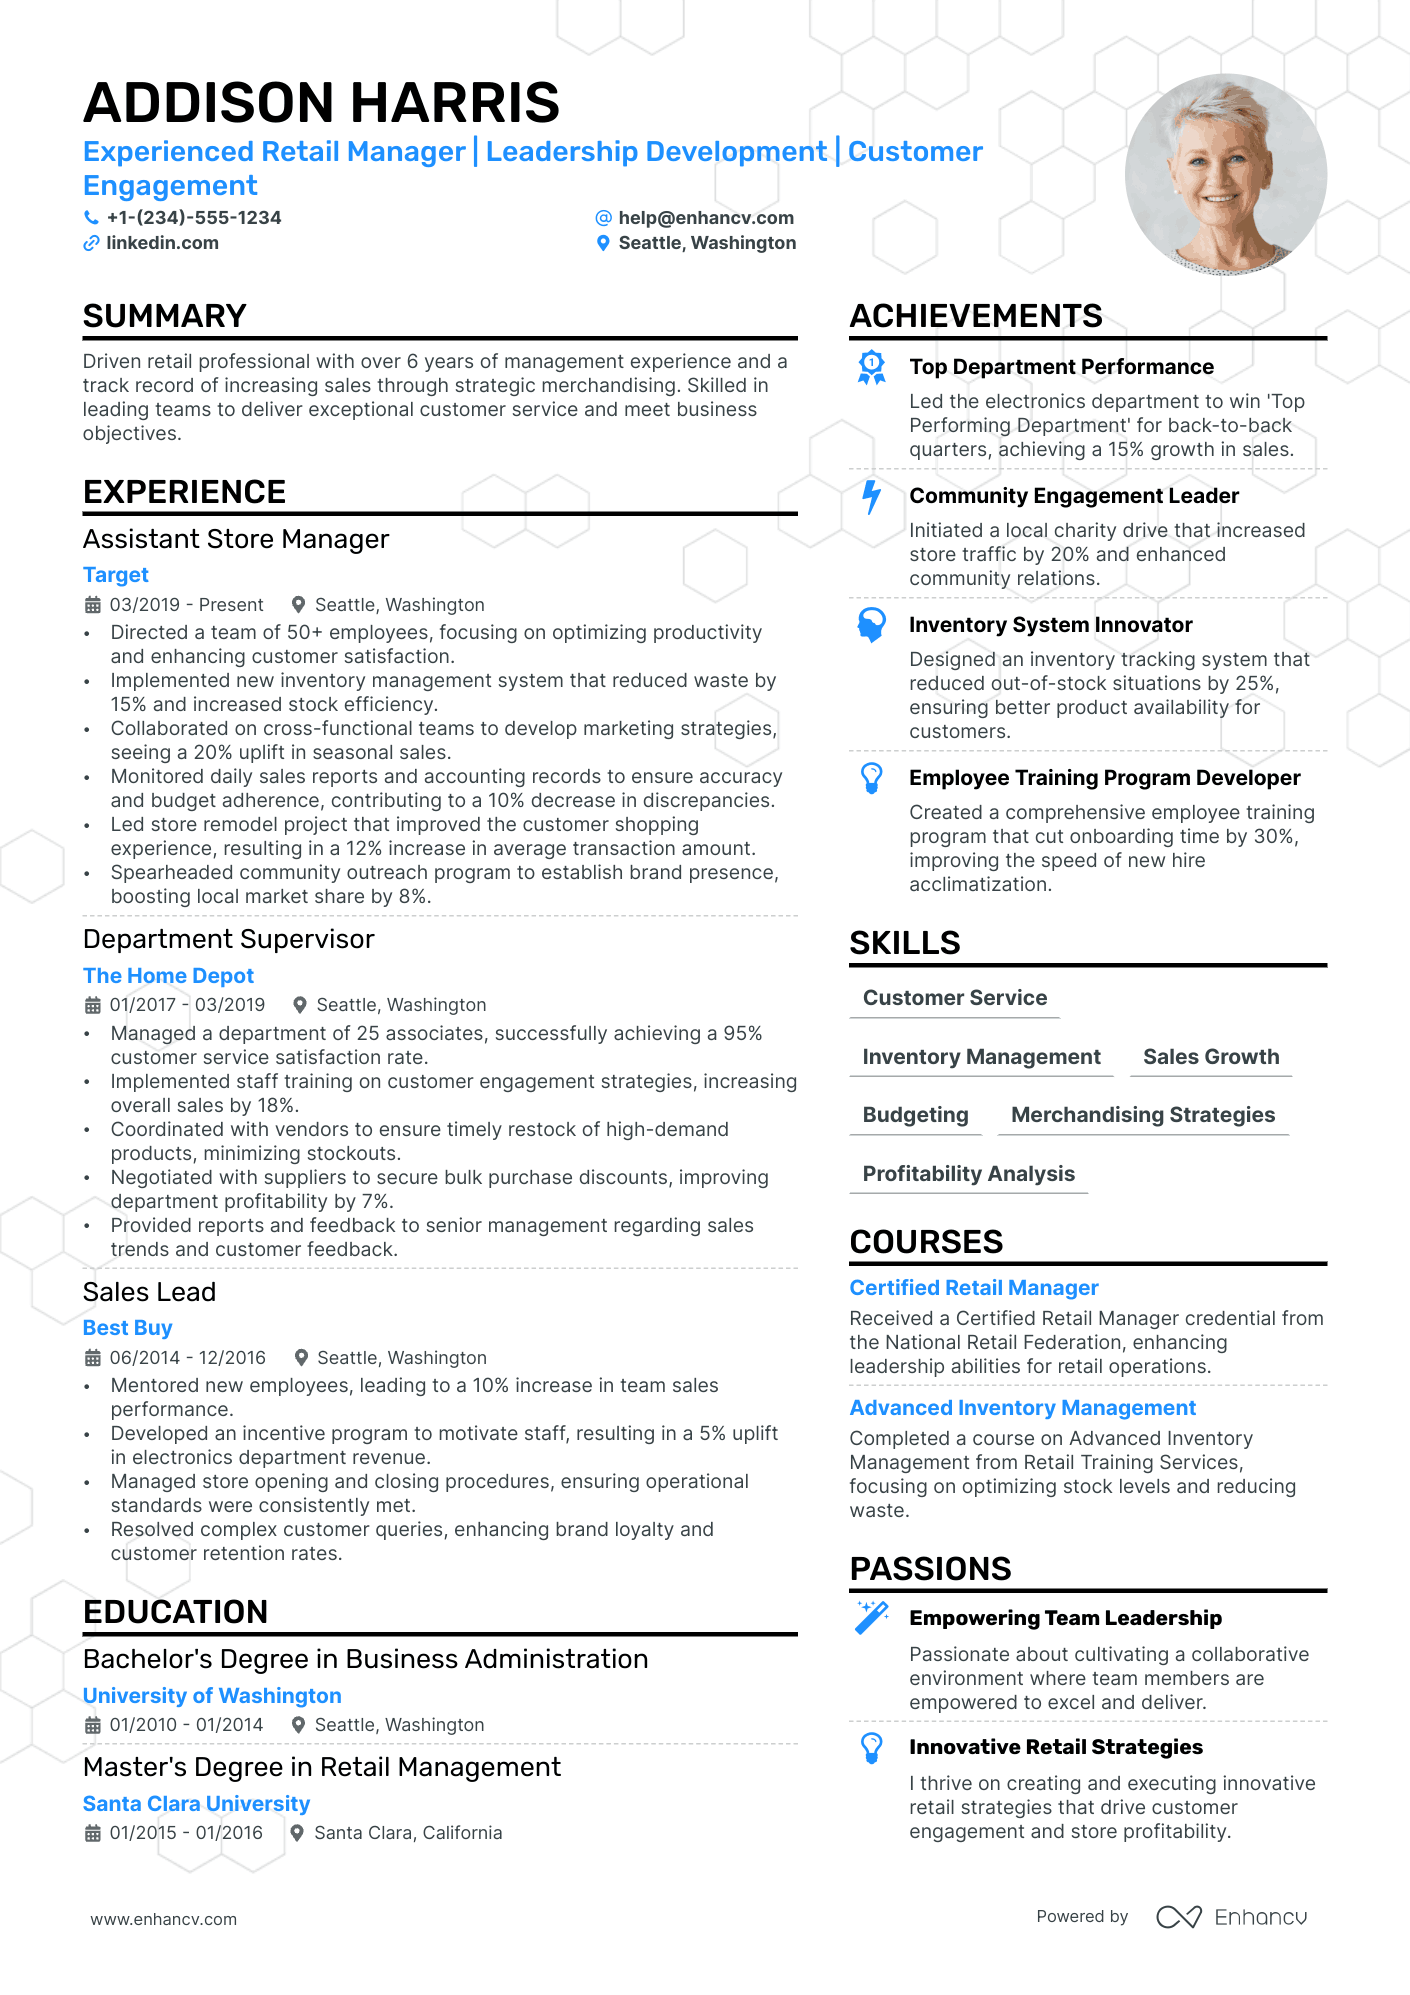 CVS Store Manager resume example